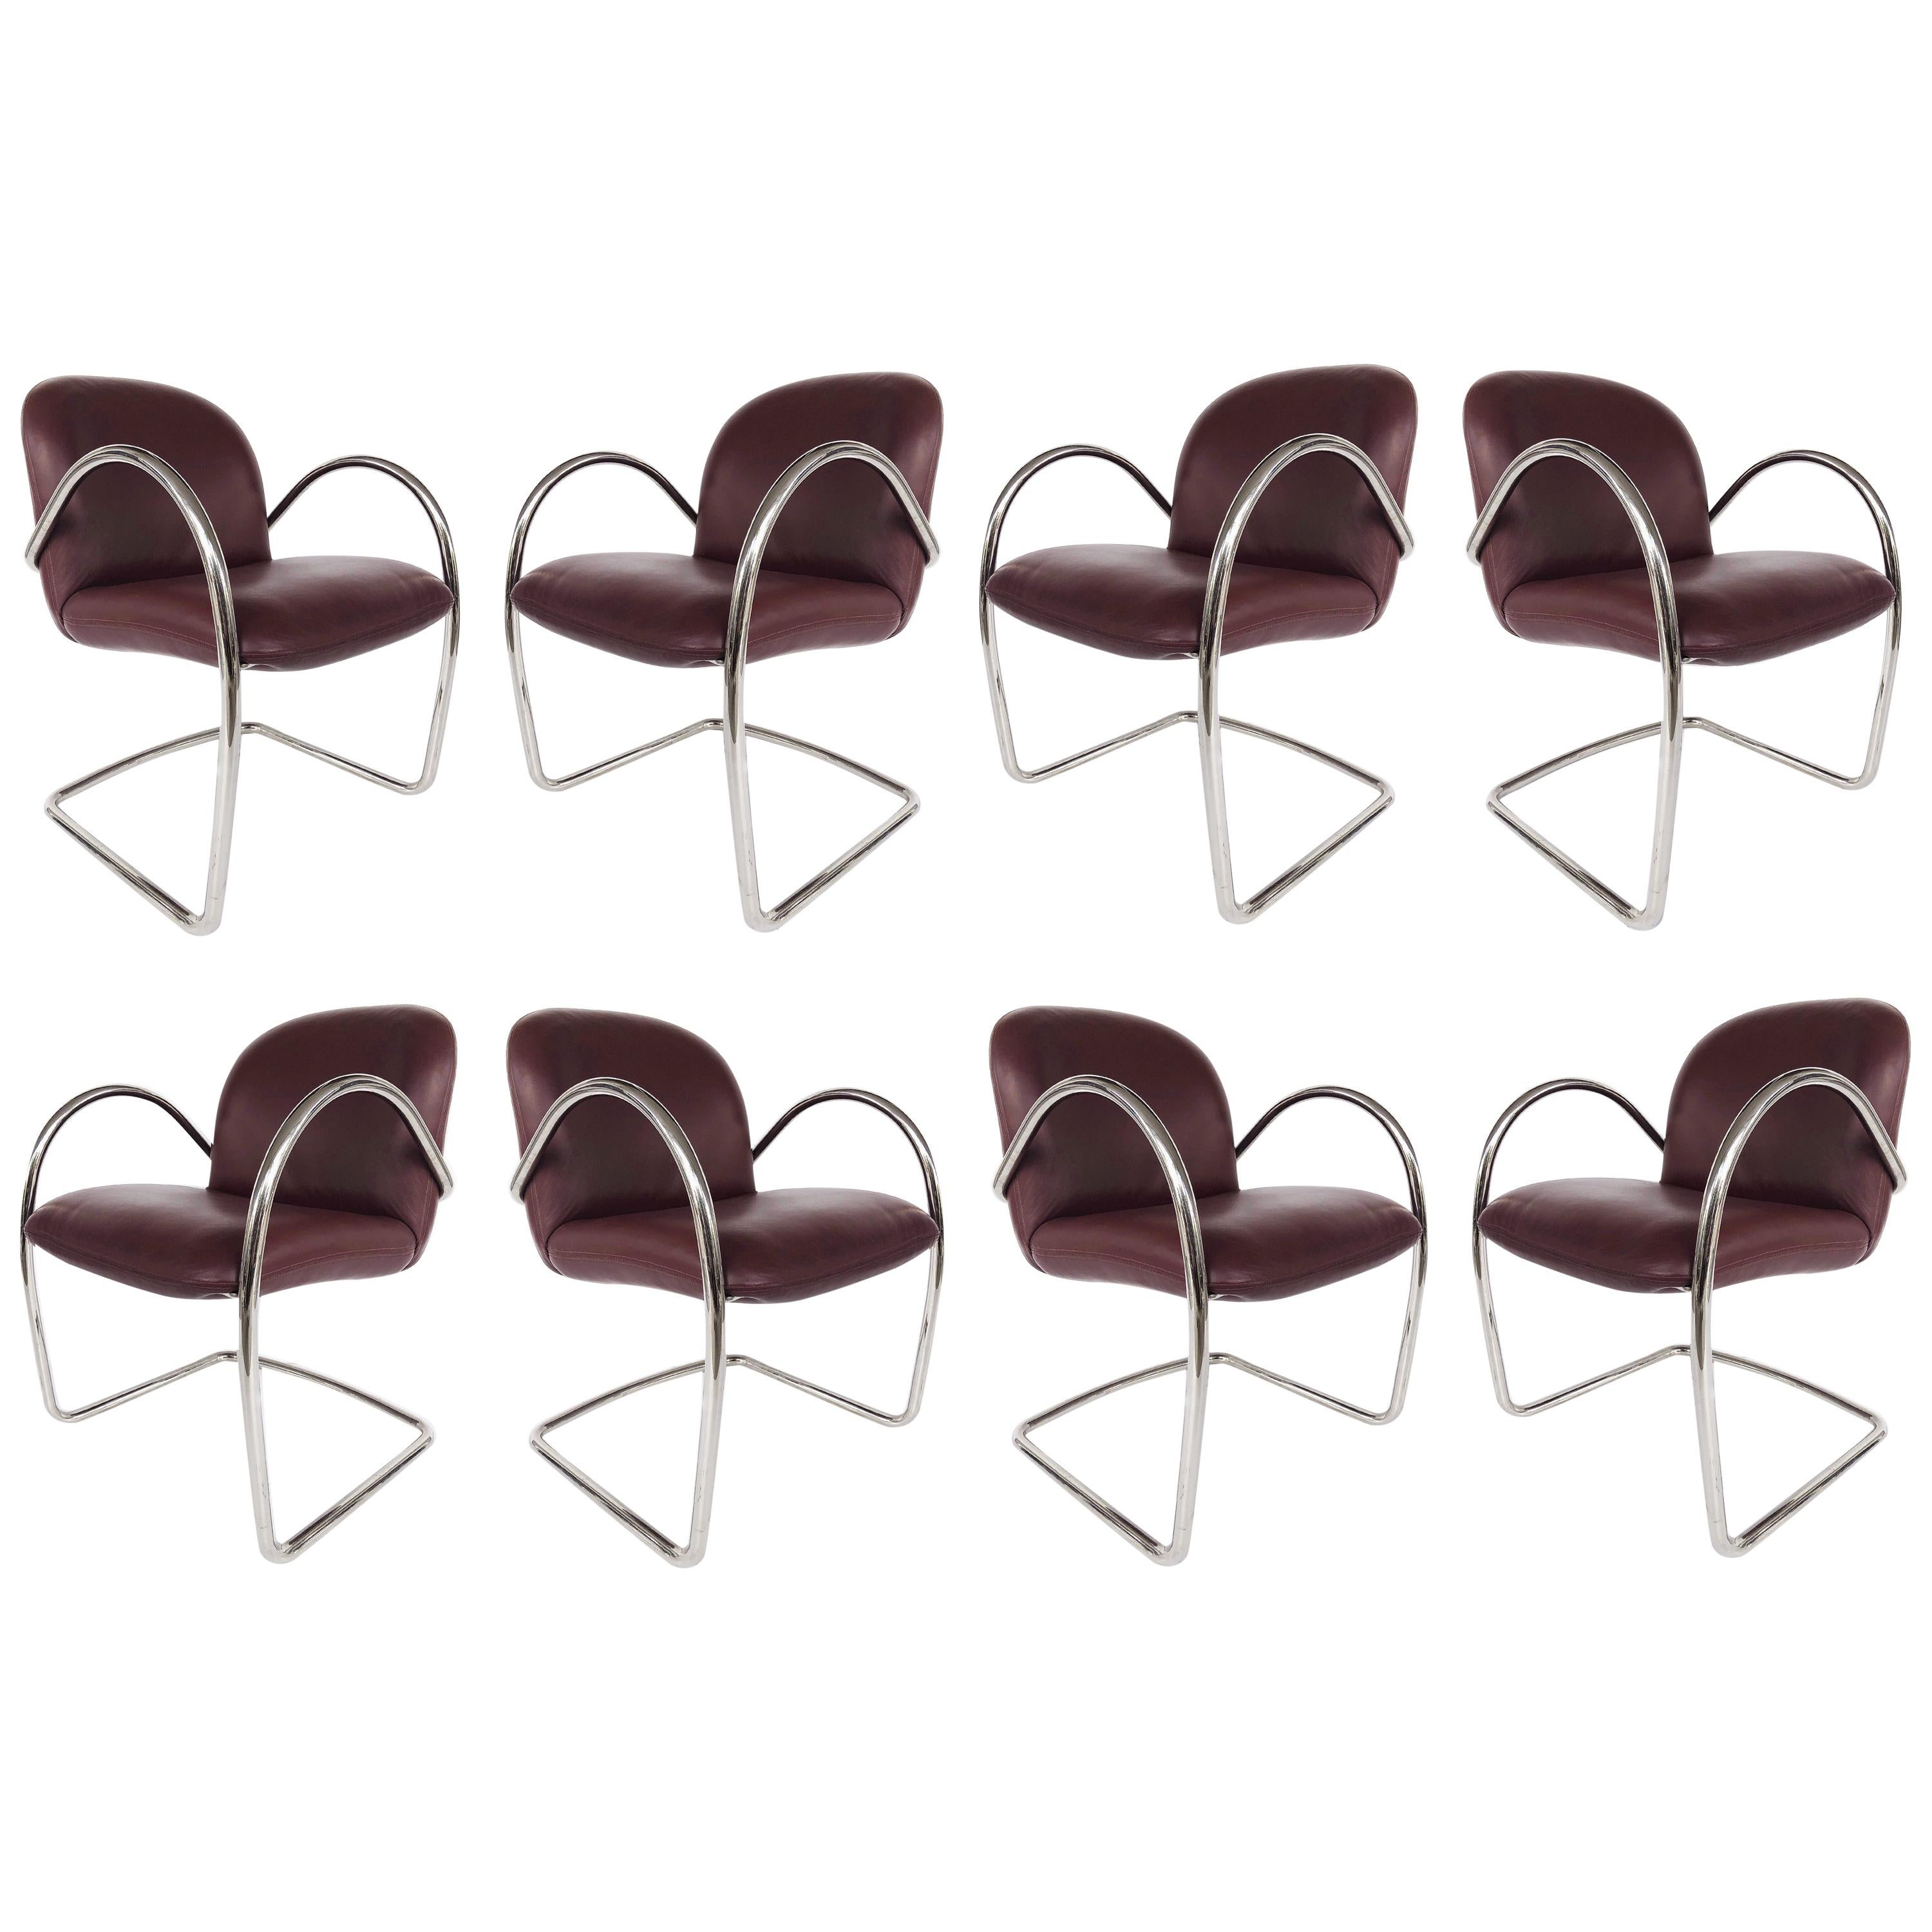 Brueton Leather and Stainless Cantilevered Chairs, Set of 8 For Sale